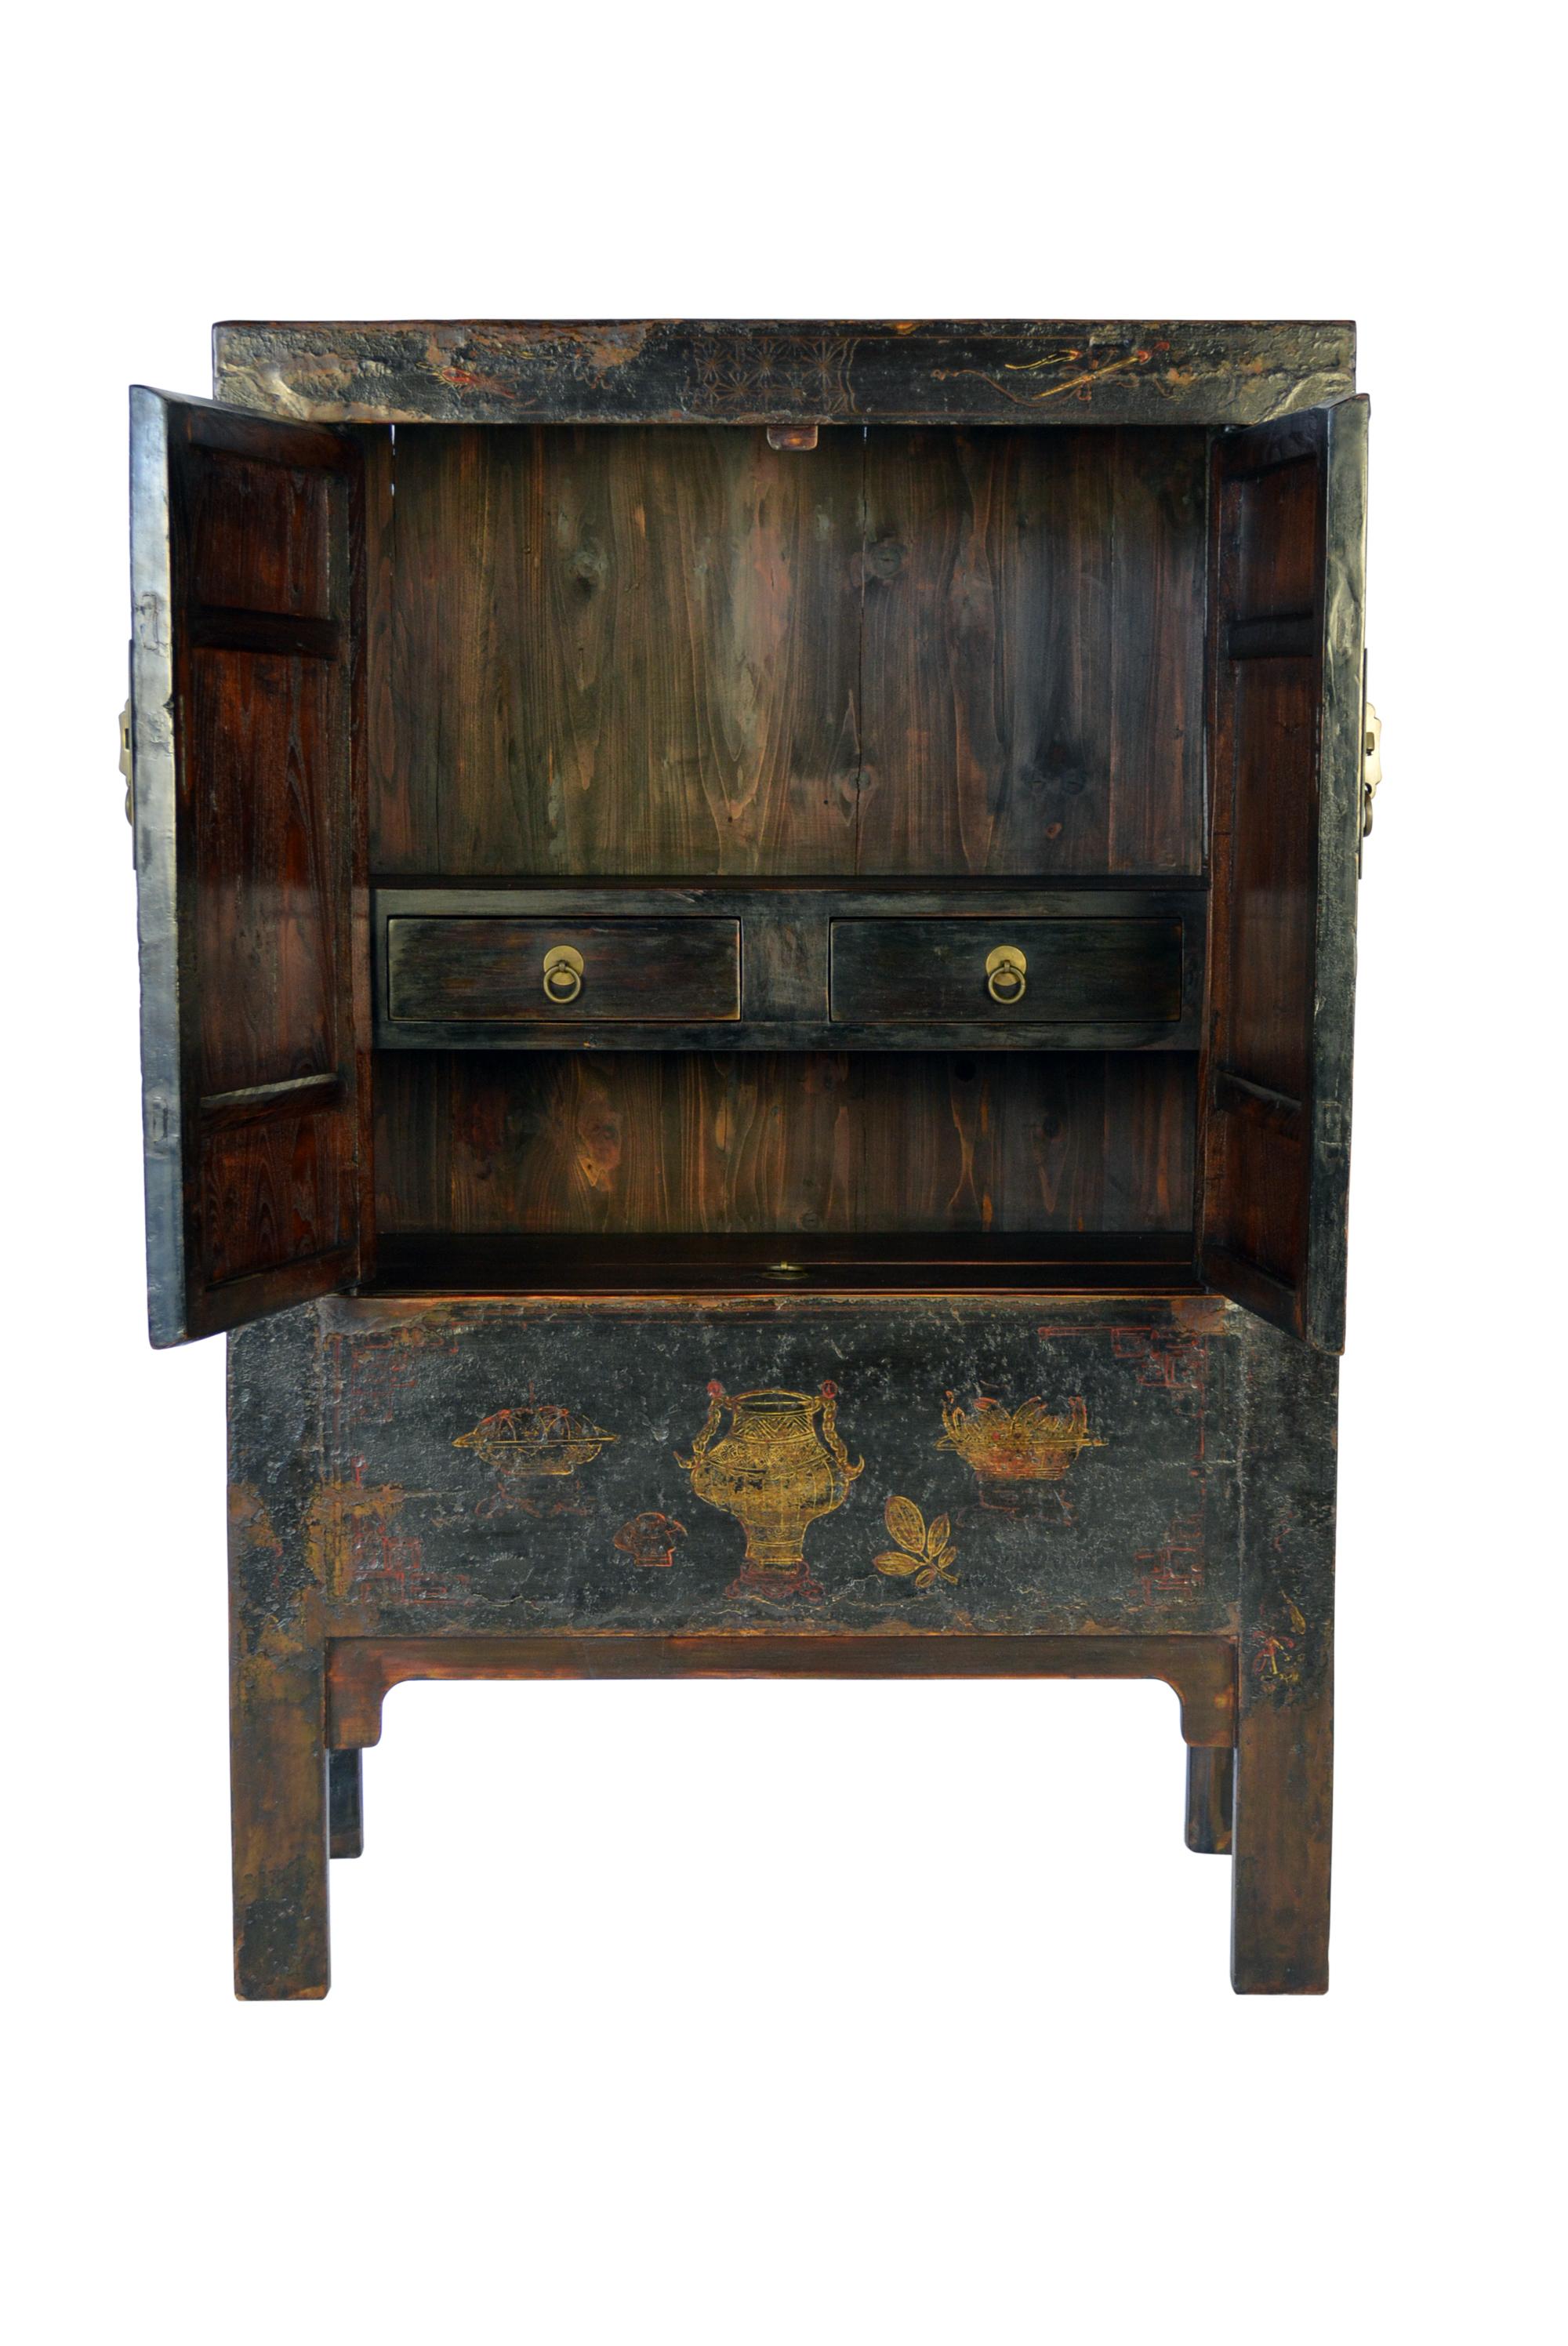 This 19th century Chinese linden wood cabinet stands square and proud with a rich, well-preserved black lacquer finish and traces of its original gilt decoration. From the remaining traces of its paintings, we can see motifs of the eight treasures